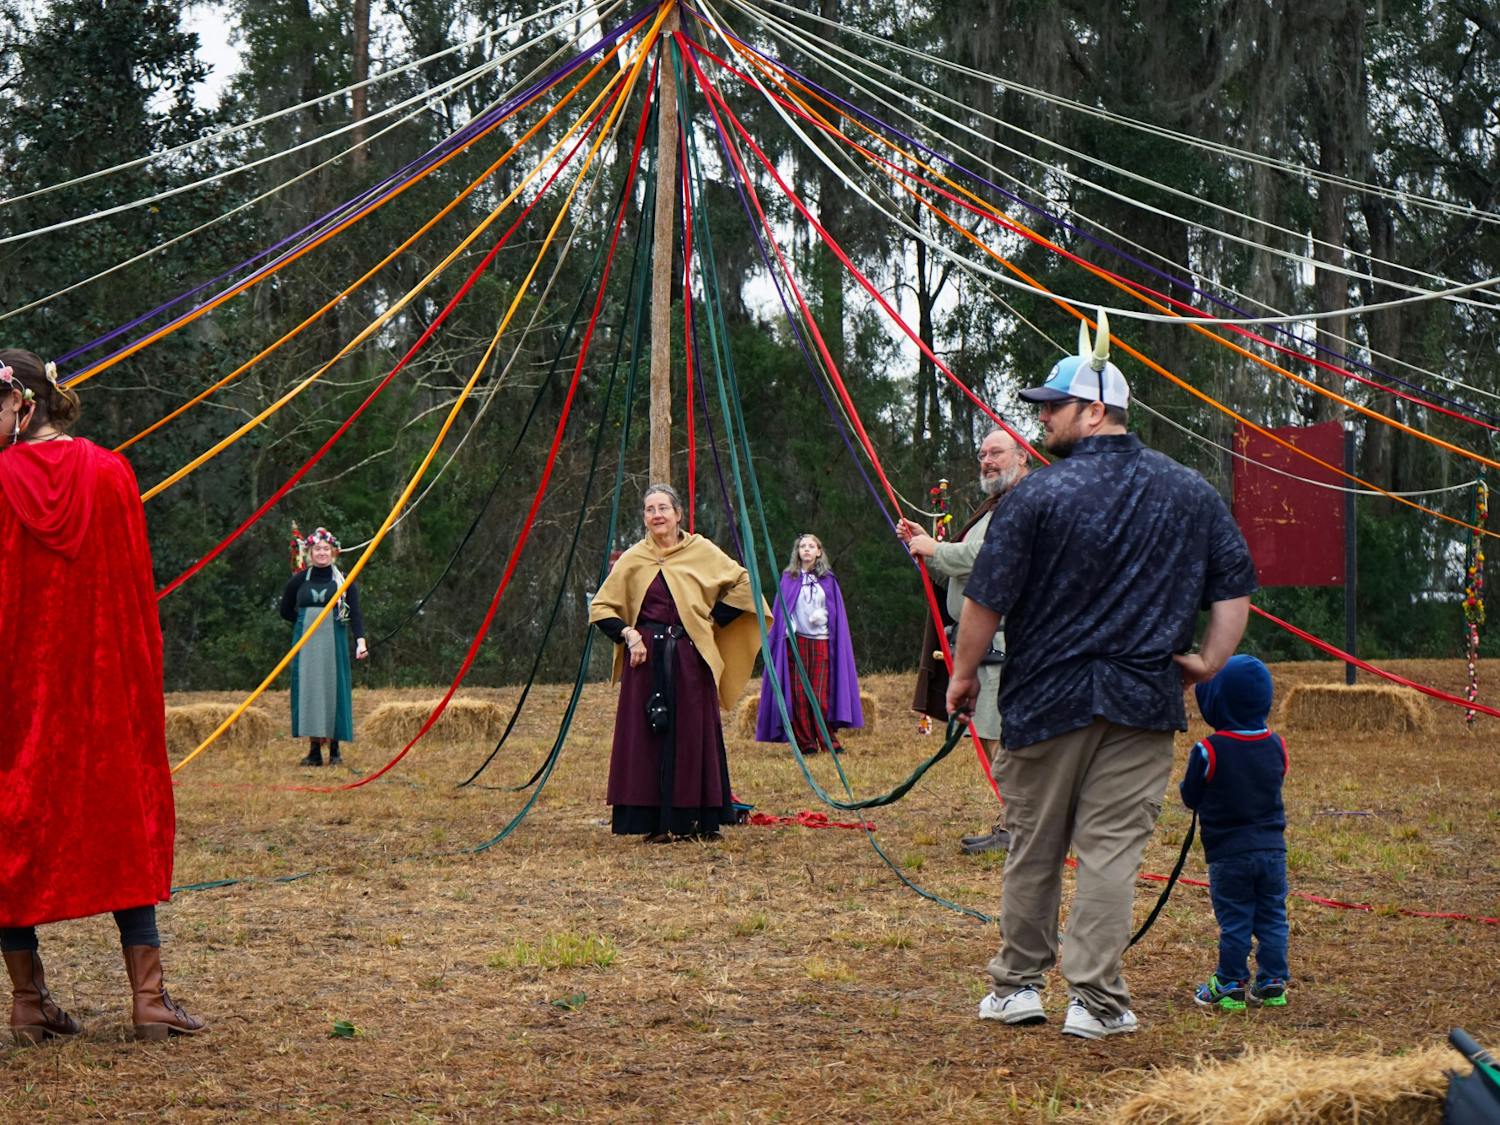 Standing at the center of the maypole activity, a worker at the Hoggetowne Medieval Faire gives directions to the crowd Saturday, Jan. 21, 2023.